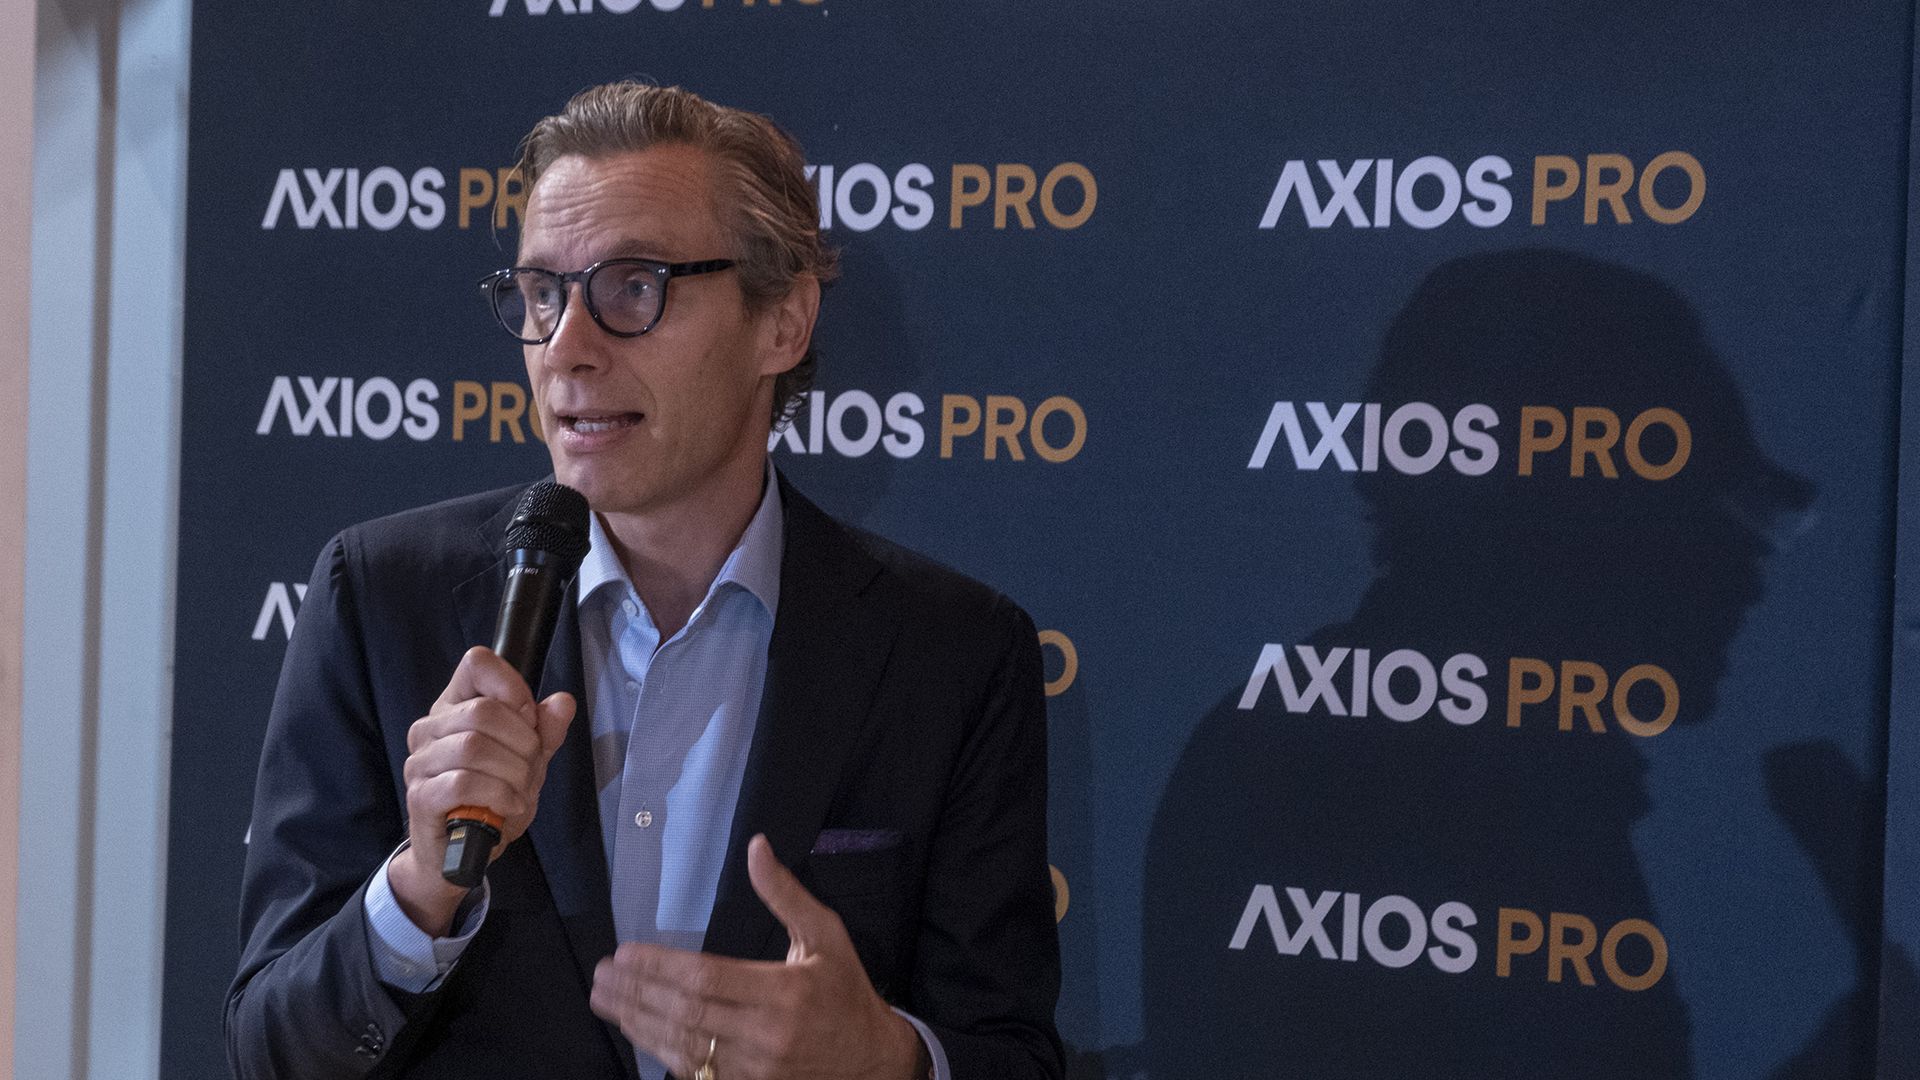 Neiman Marcus CEO Geoffroy van Raemdonck at the Axios BFD event on Oct. 26, 2022